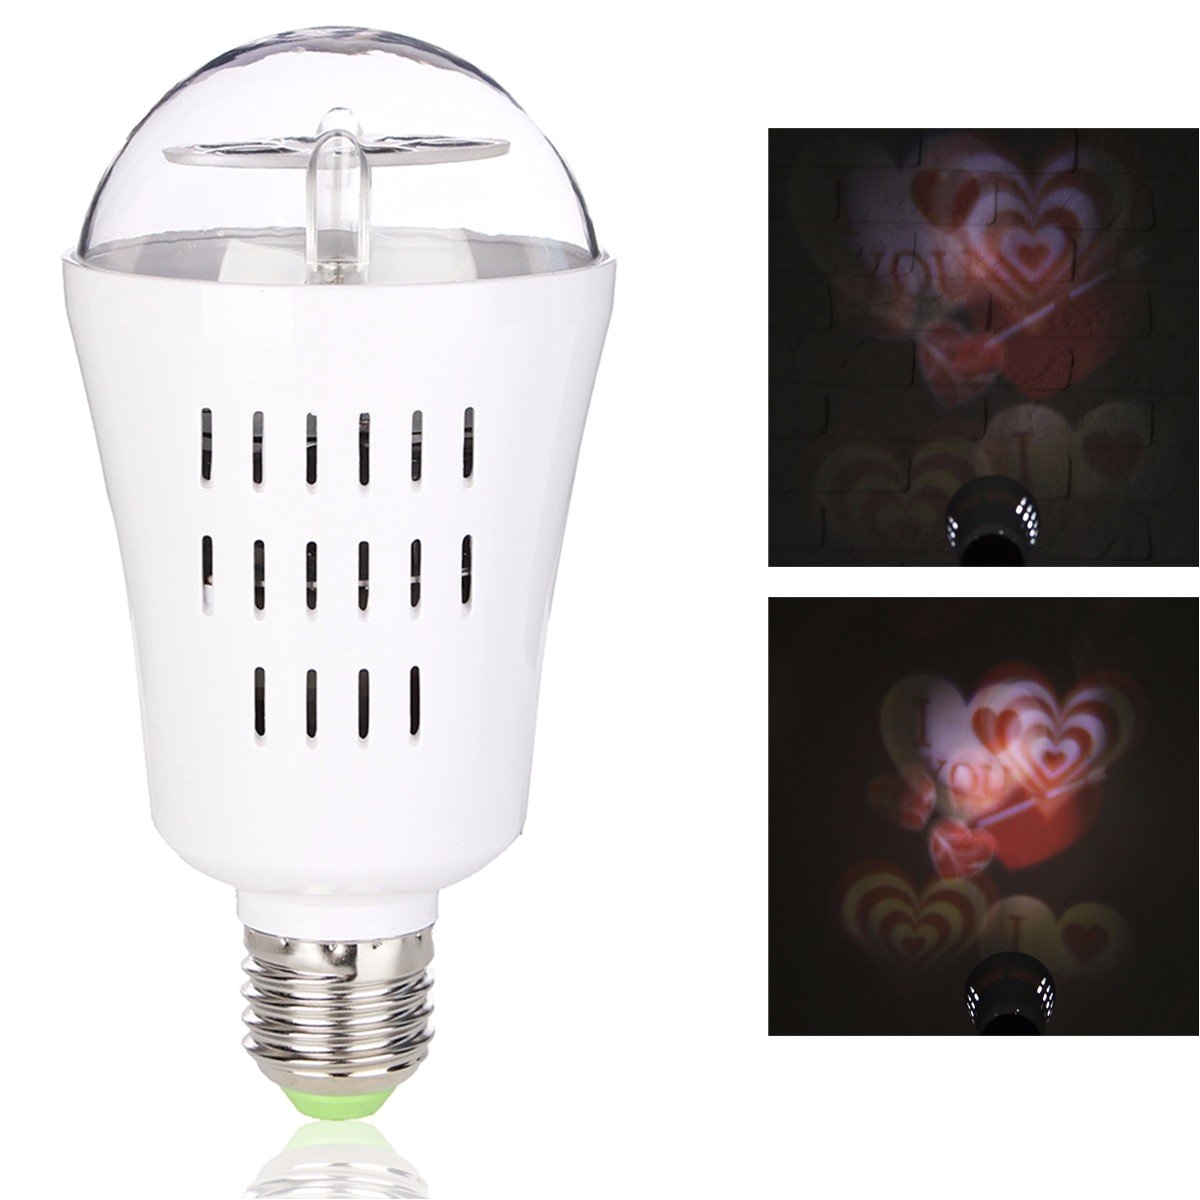 e27 4w heart shaped led rotating projector stage light lamp bulb wedding holiday bedroom decor